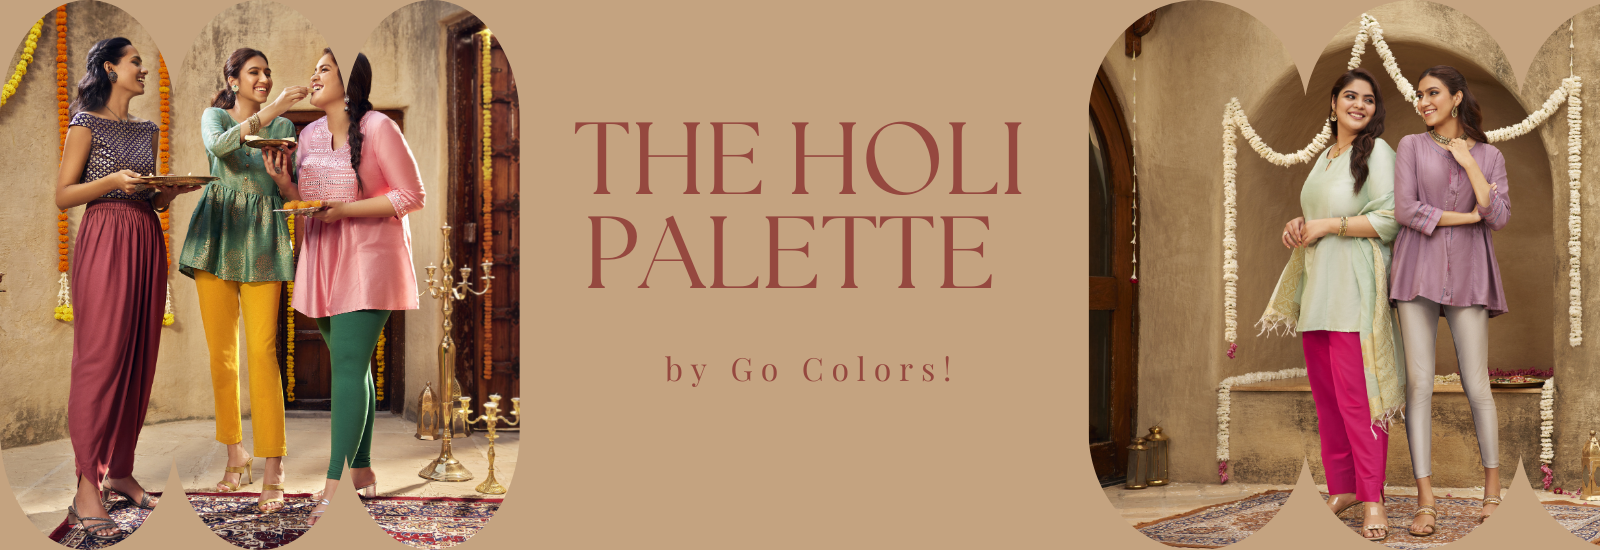 The Holi Palette by Go Colors: Styles for the Festival of Colors!